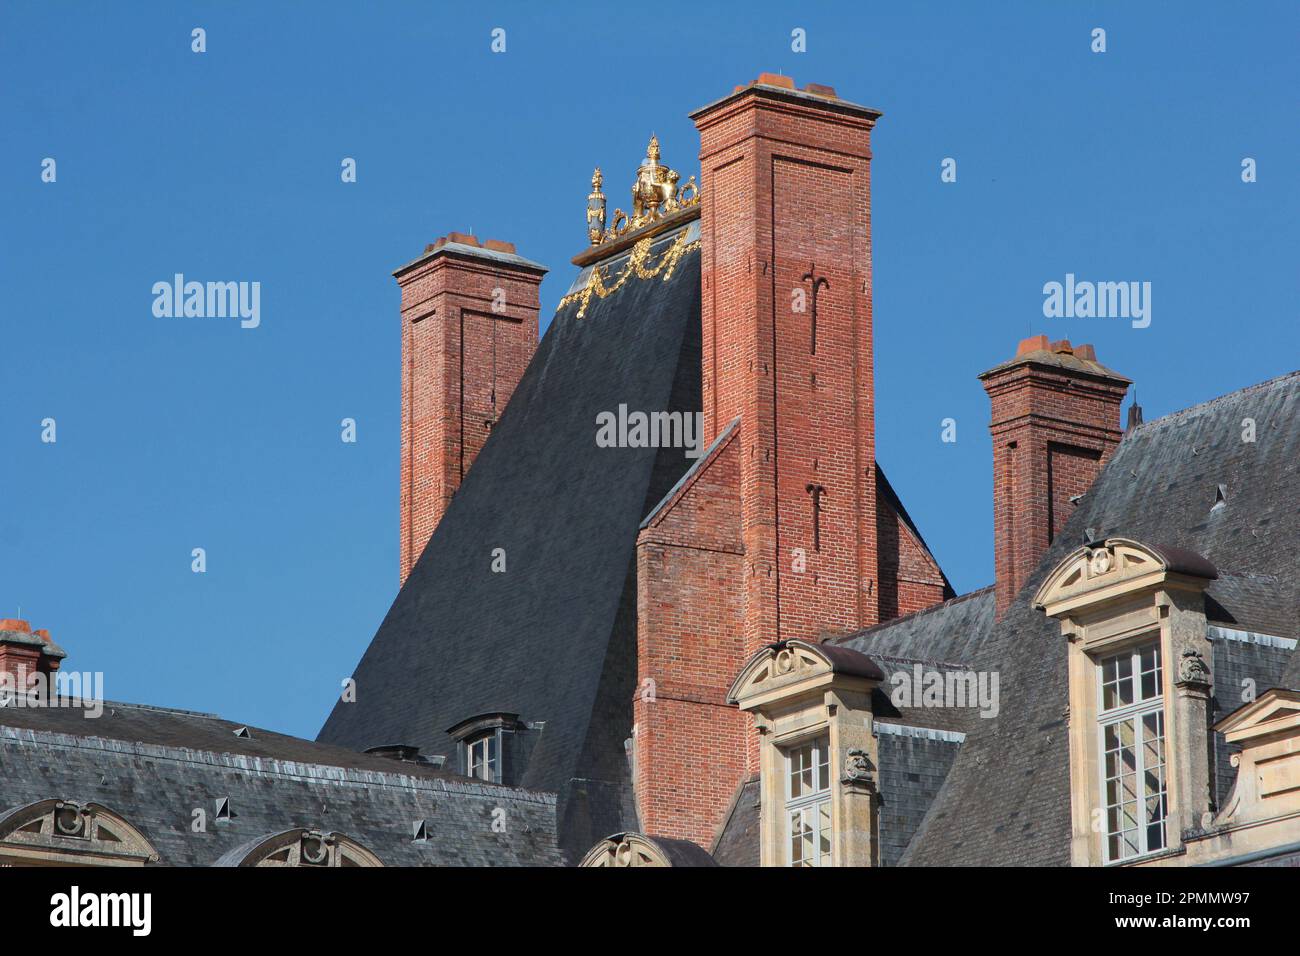 Fontainebleau Palace: the brick chimneys, steep-pitched slate-tiled roof and gold acroteria atop the medieval keep seen from Place de la Fontaine Stock Photo